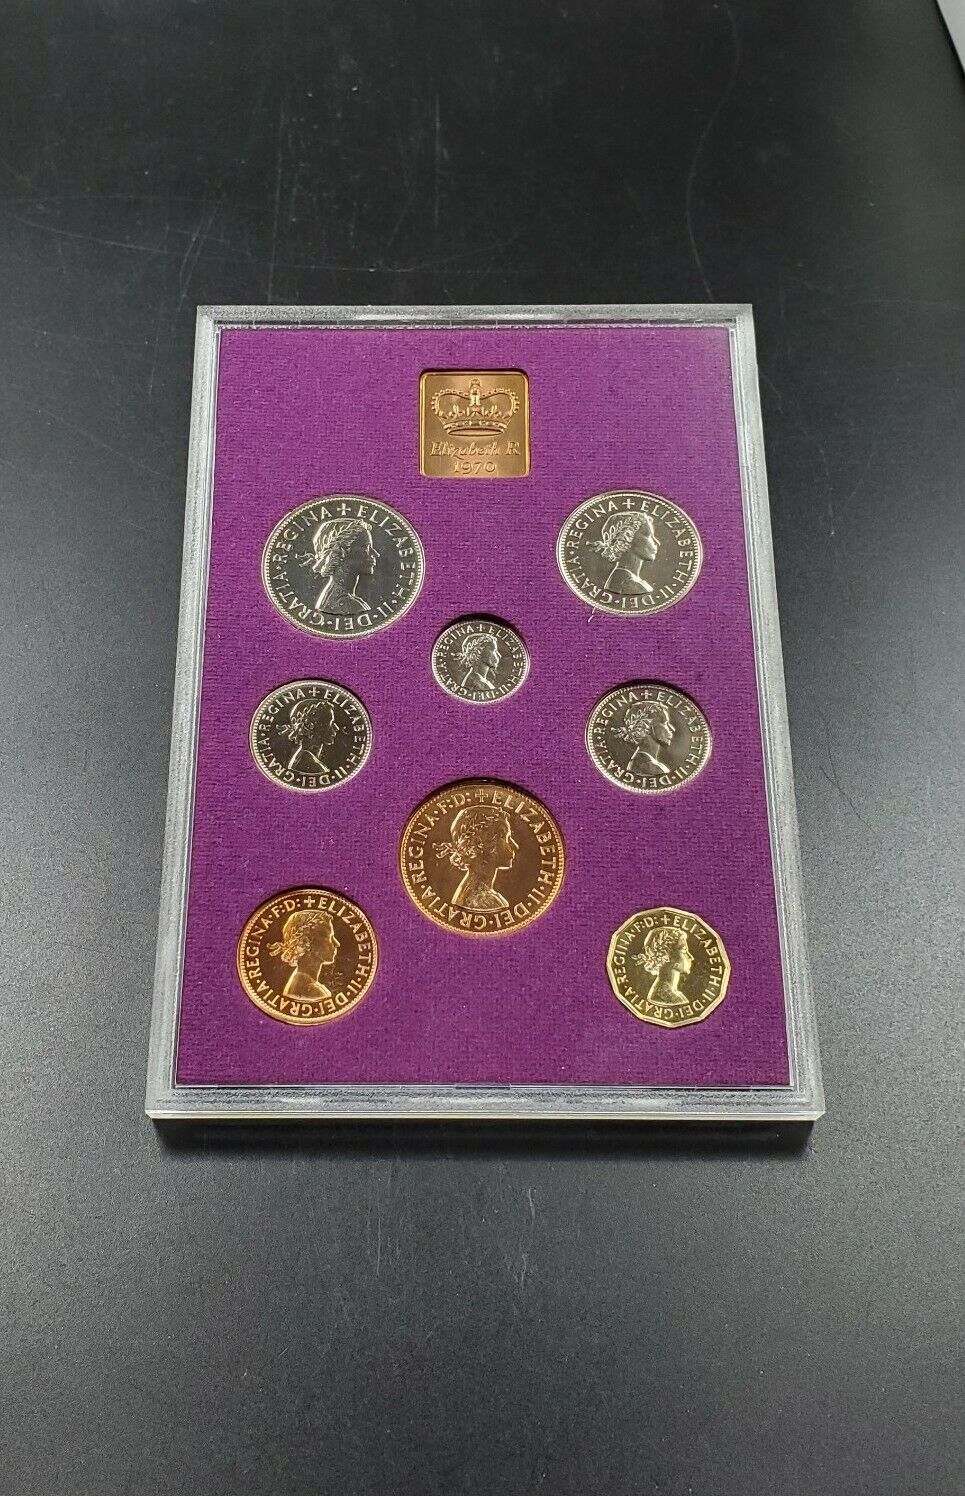 1970 Northern ireland sets-listed for 29.99 already w/ shipping charge, reduce?